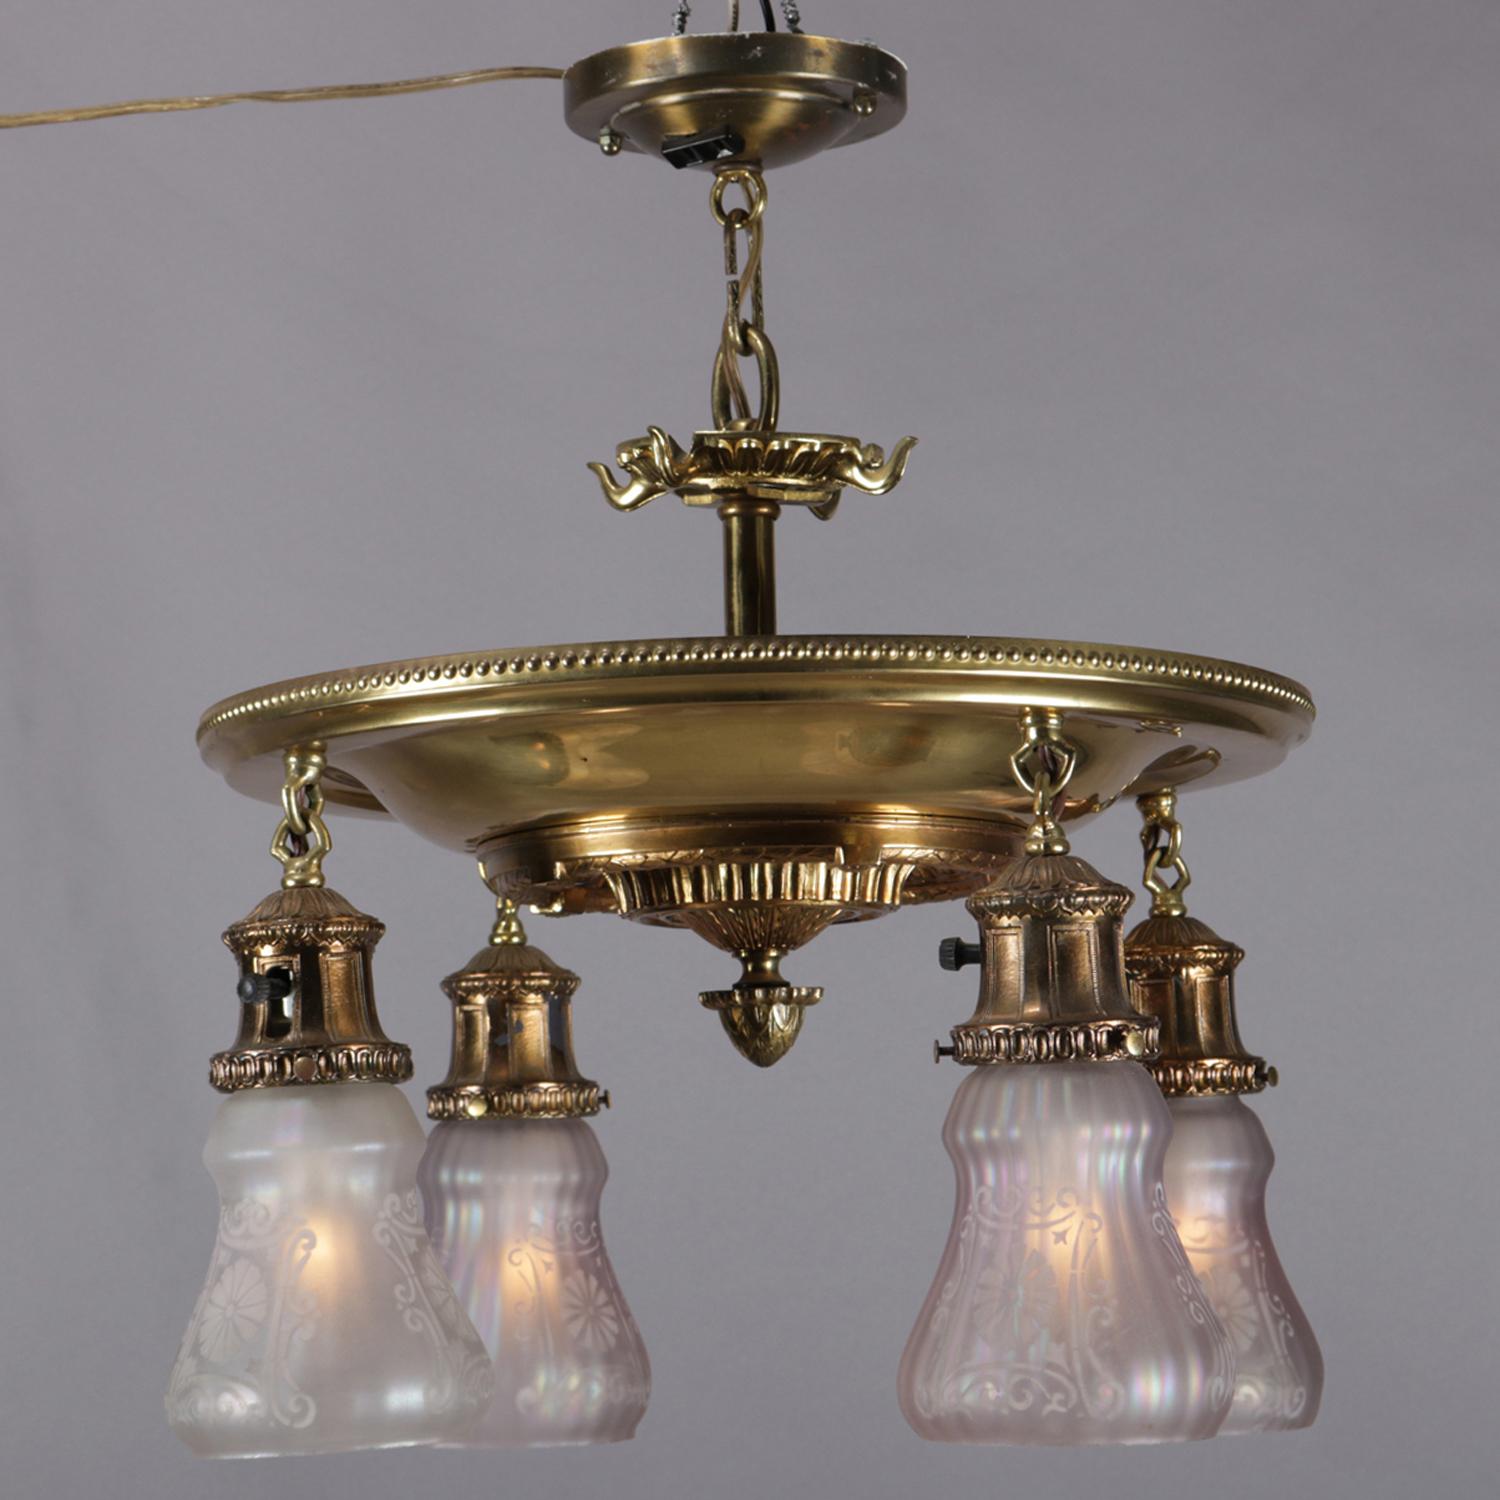 Antique bronze chandelier features flush mount circular and stepped cast base having foliate motif and central drop finial with 4 drop lights terminating in opalescent shades with stencil etched foliate decoration, circa 1920

Measures: 20